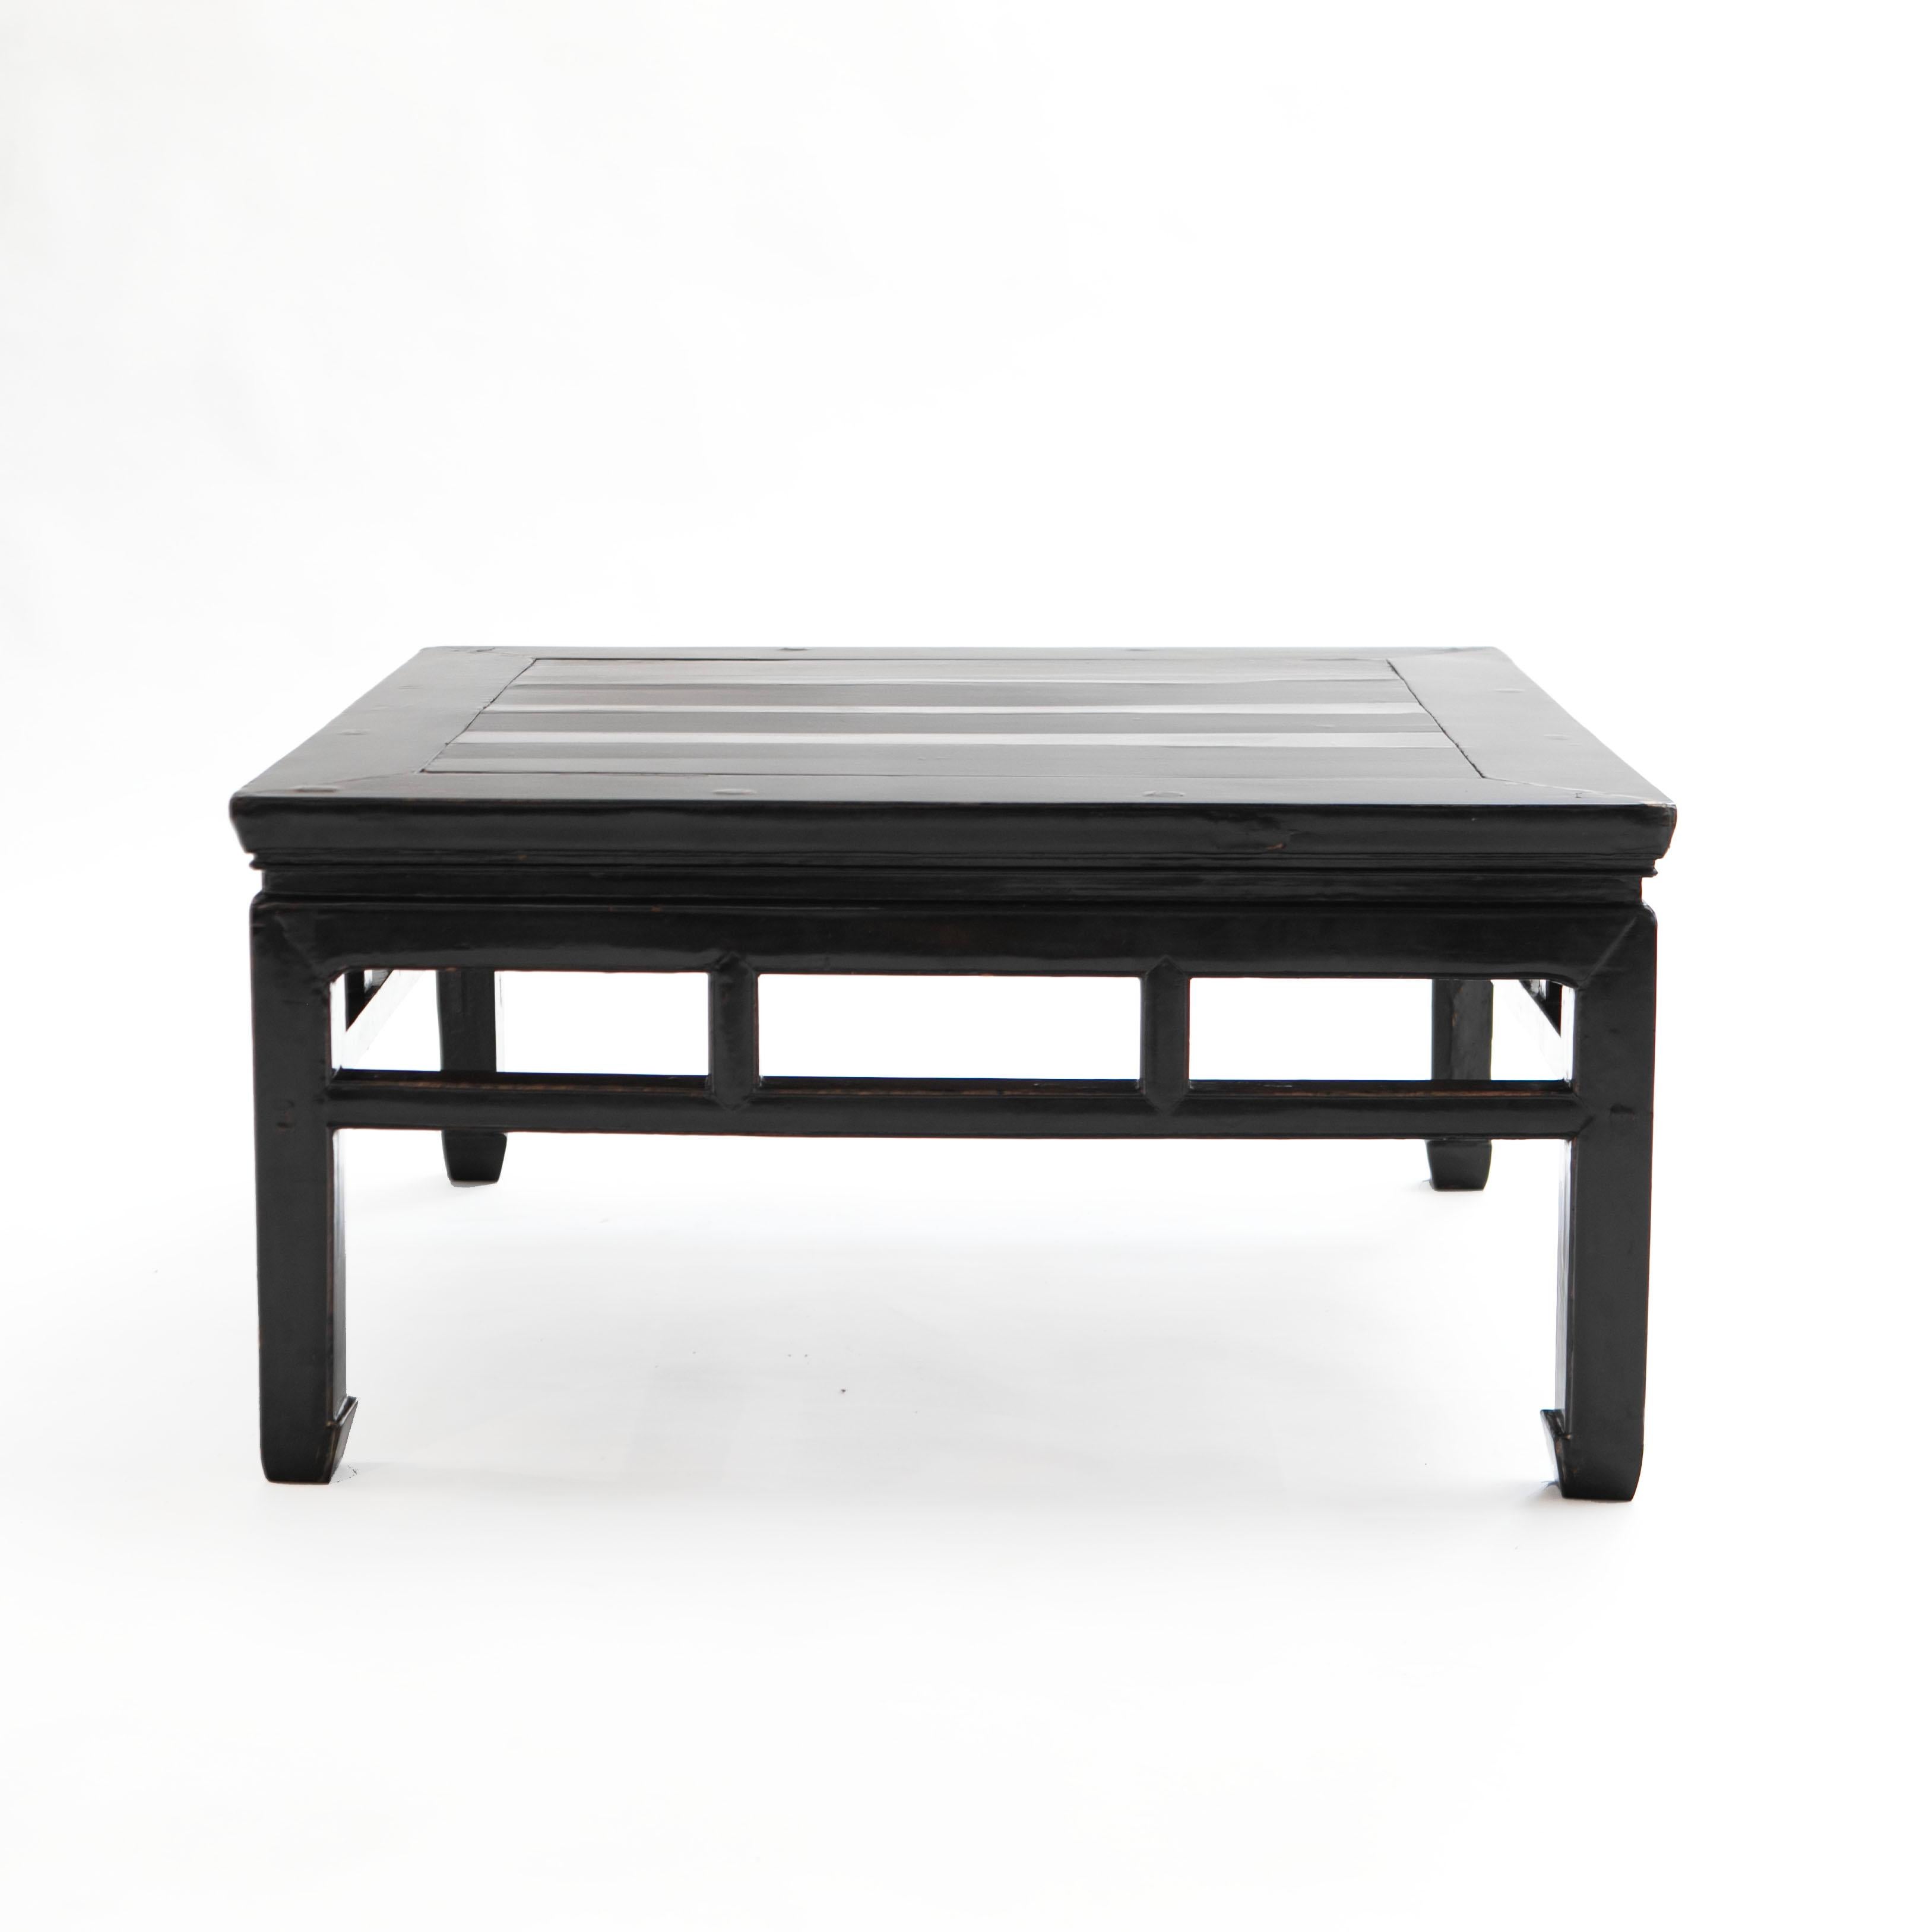 A Chinese Ming style coffee table crafted in elm wood with original black lacquer and natural patina, enhanced with a clear lacquer surface finish.

Jiangsu Province, China 1860-1870